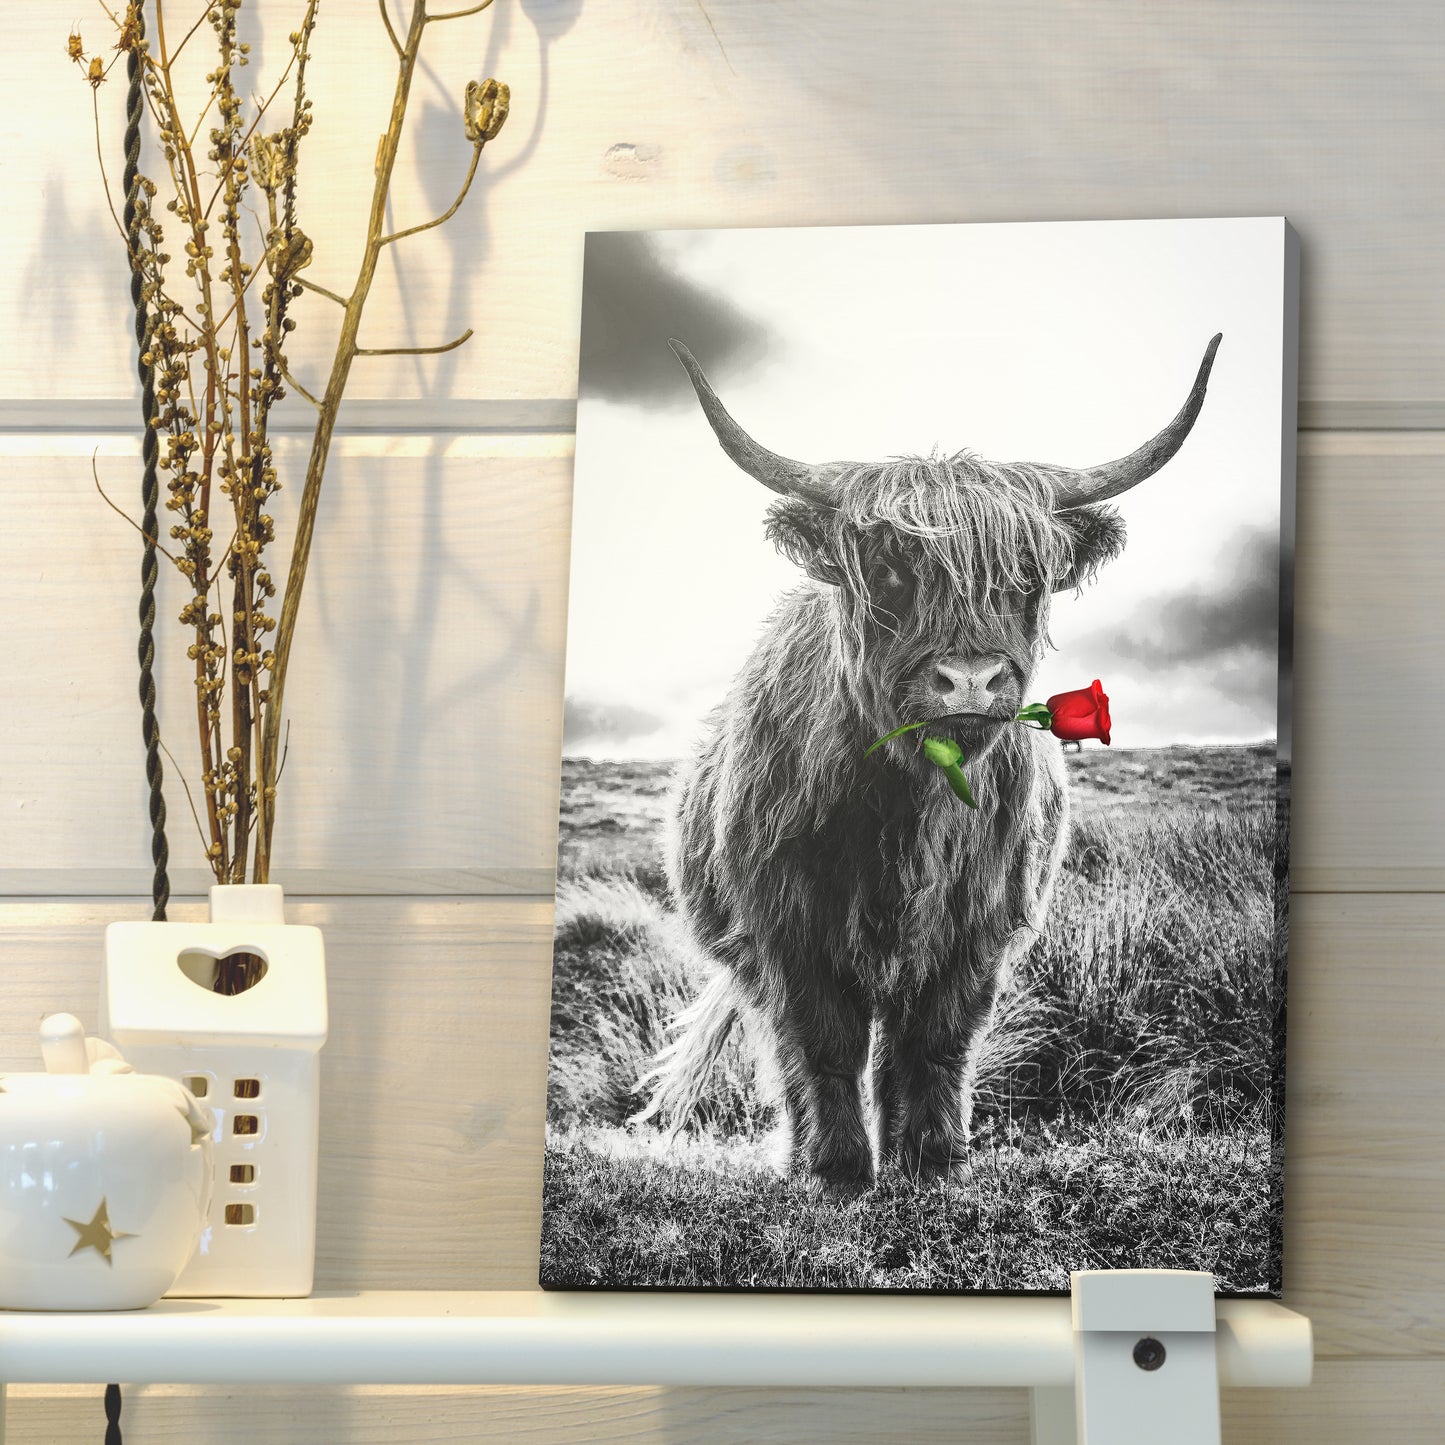 Freedom Highland Cow Rose Canvas Wall Art Style 1 - Image by Tailored Canvases 